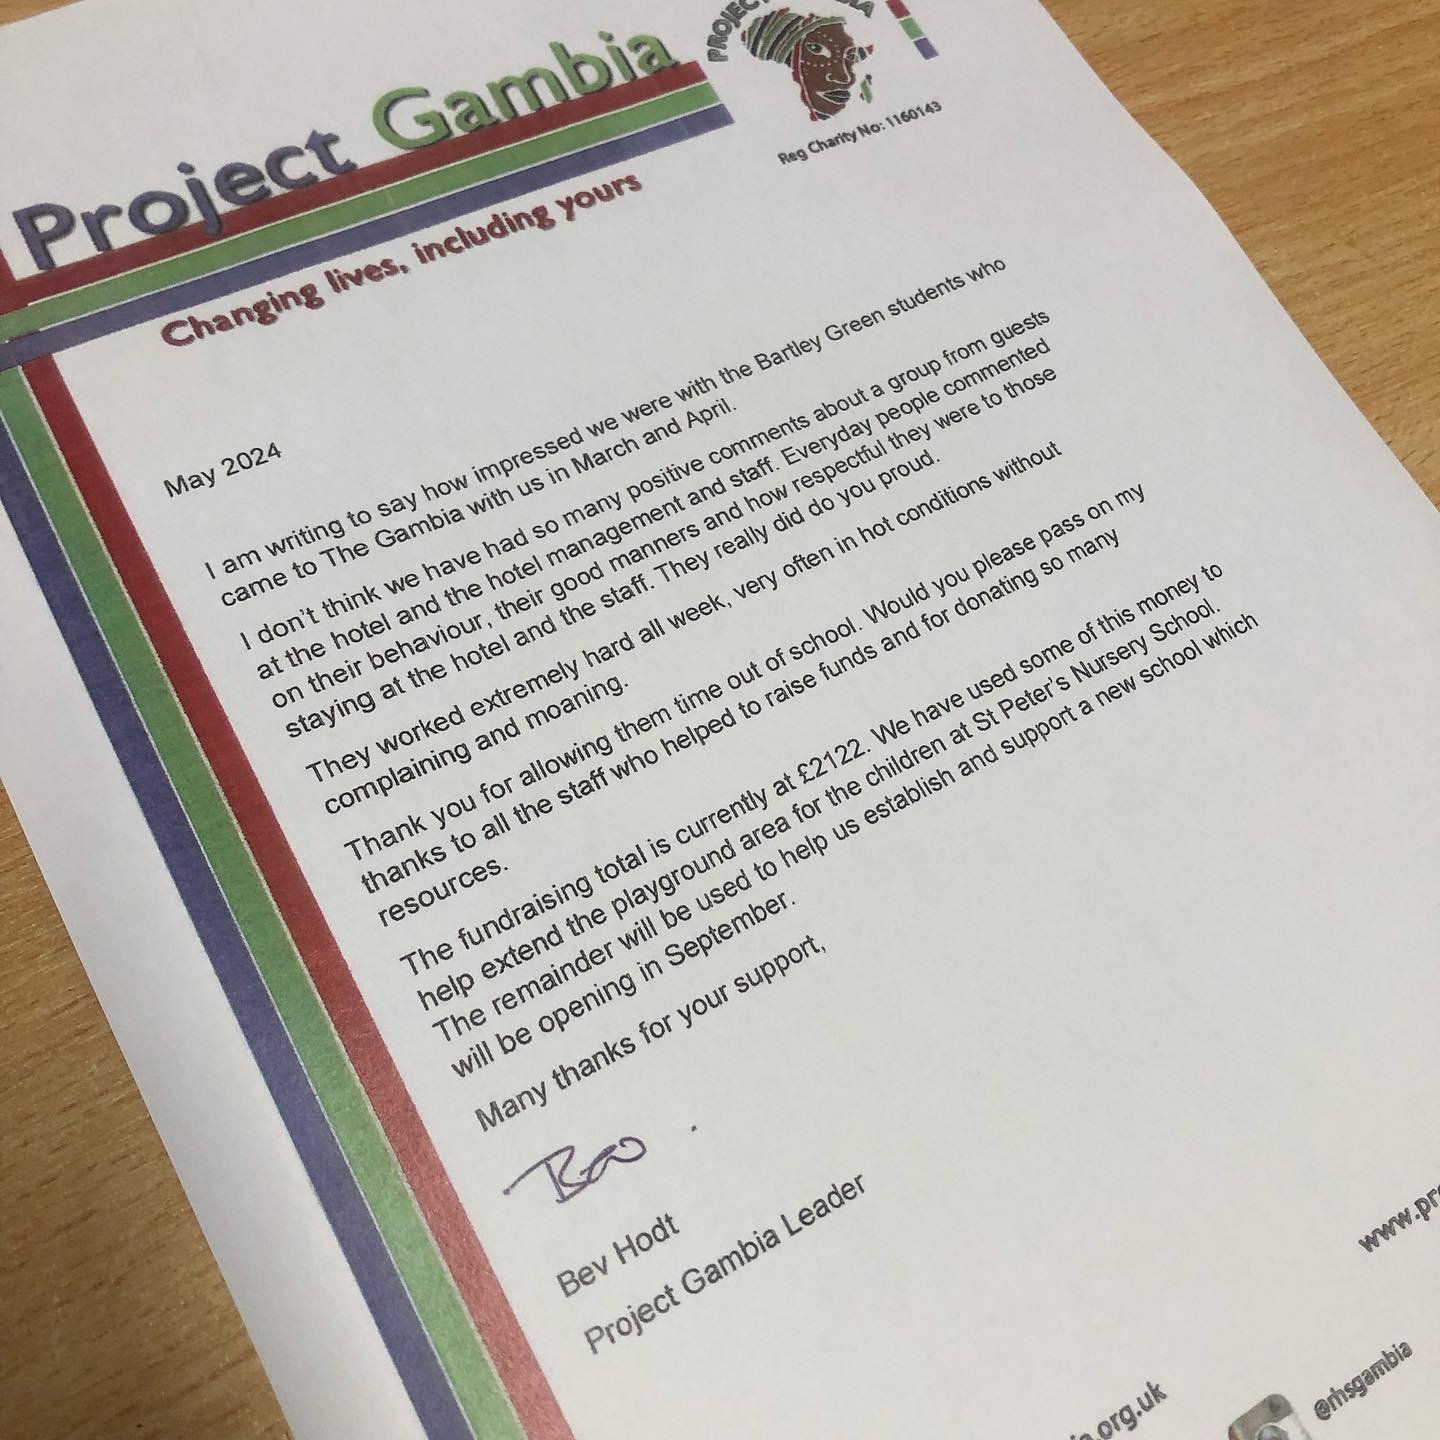 &ldquo;I am writing to say how impressed we were with the Bartley Green students who came to The Gambia&hellip;Everyday people commented on their behaviour, their good manners and on how respectful they were&hellip;They really did you proud&rdquo; @r